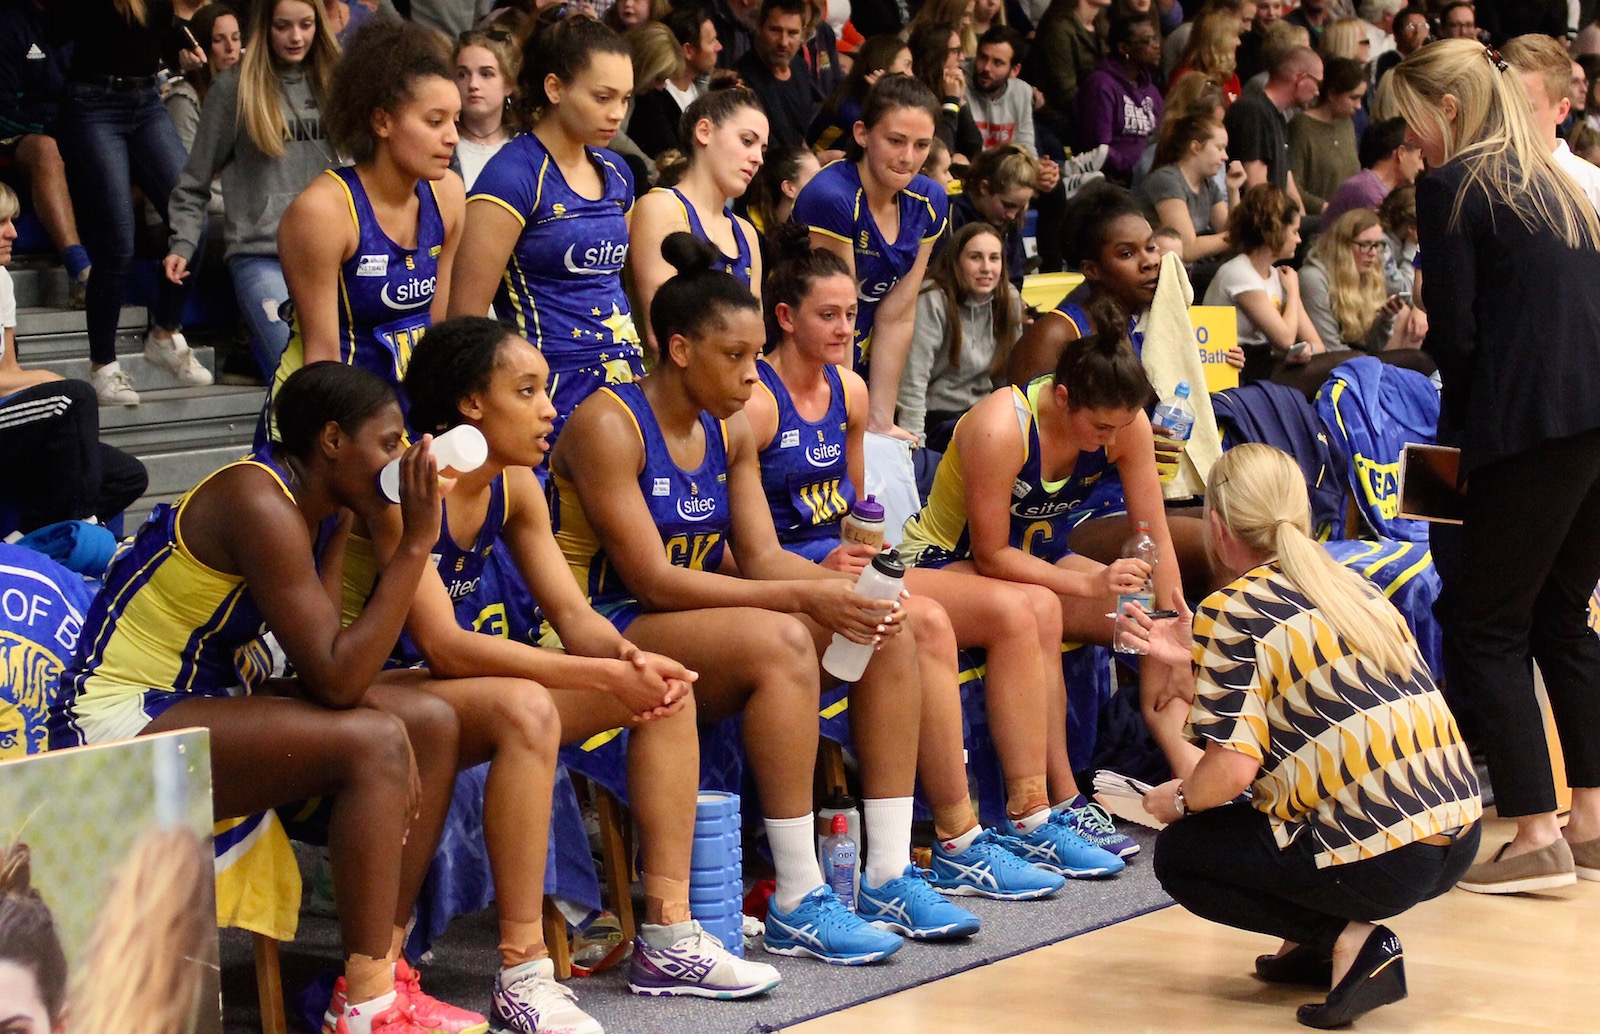 Team Bath Netball will go into next week’s home match against Wasps on the back of three successive wins